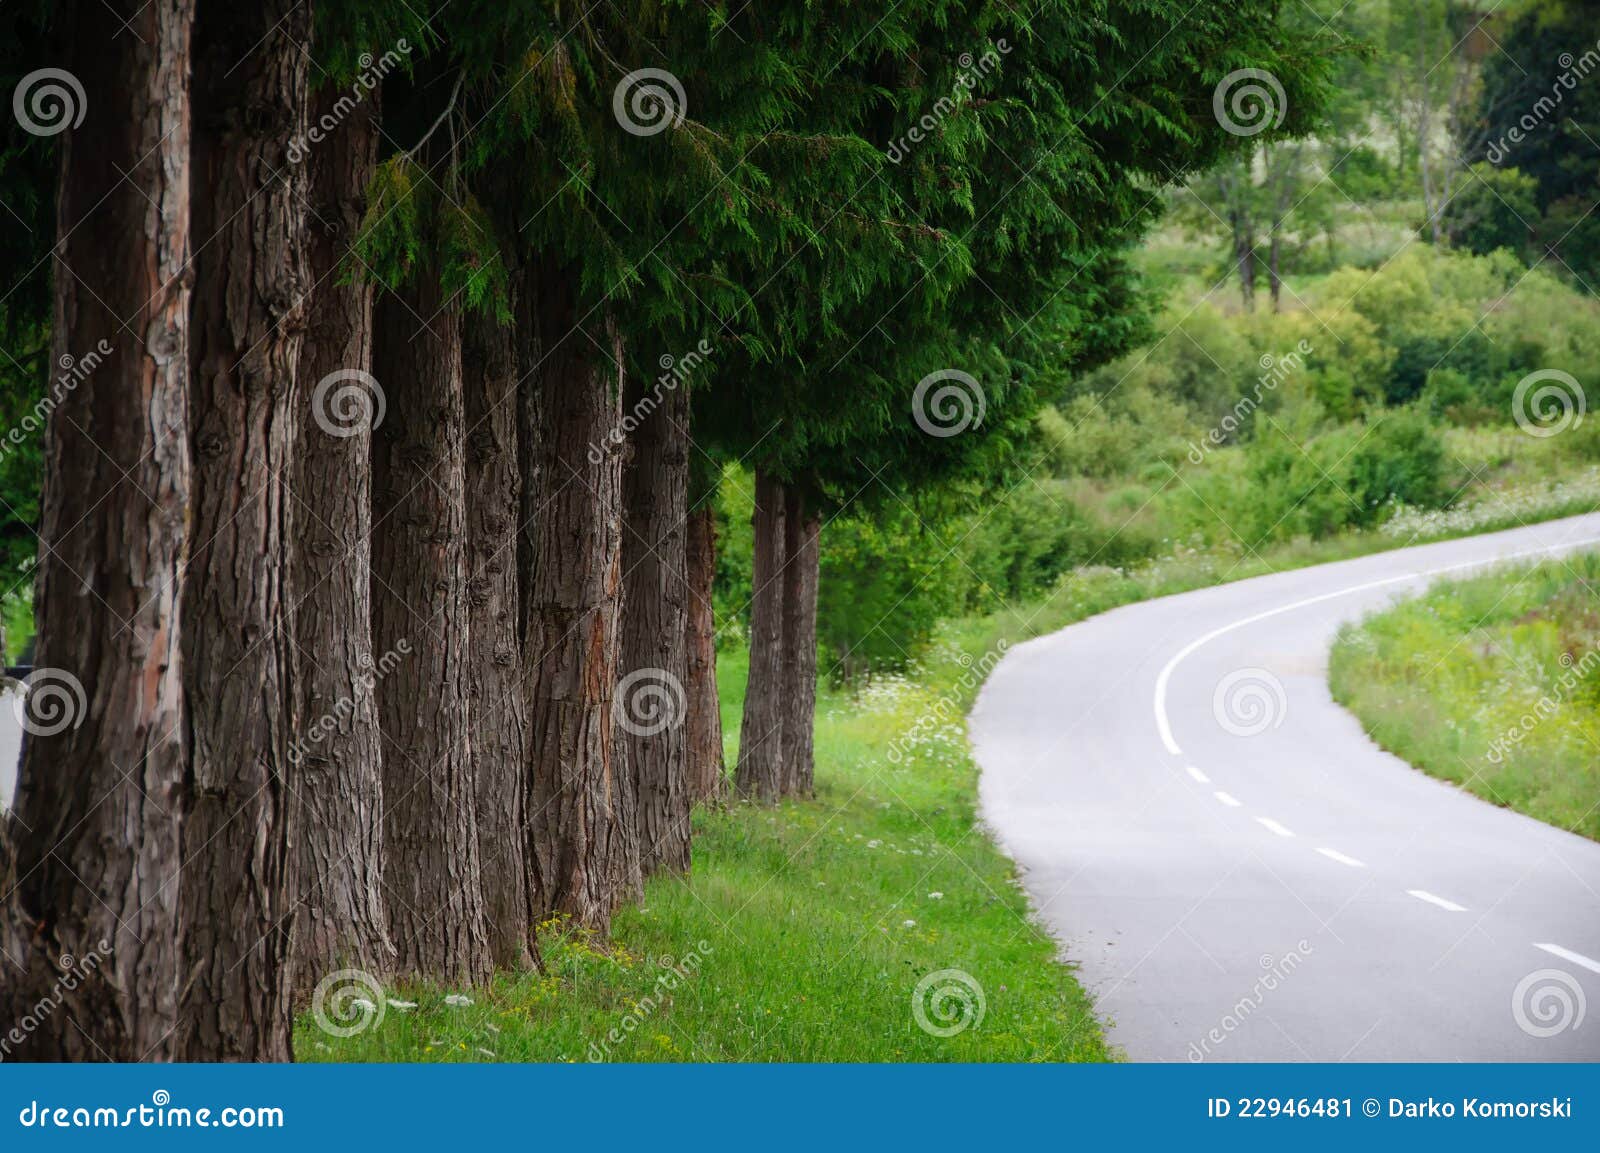 Road Curving Past Trees Stock Image Image Of Trip Pines 22946481 